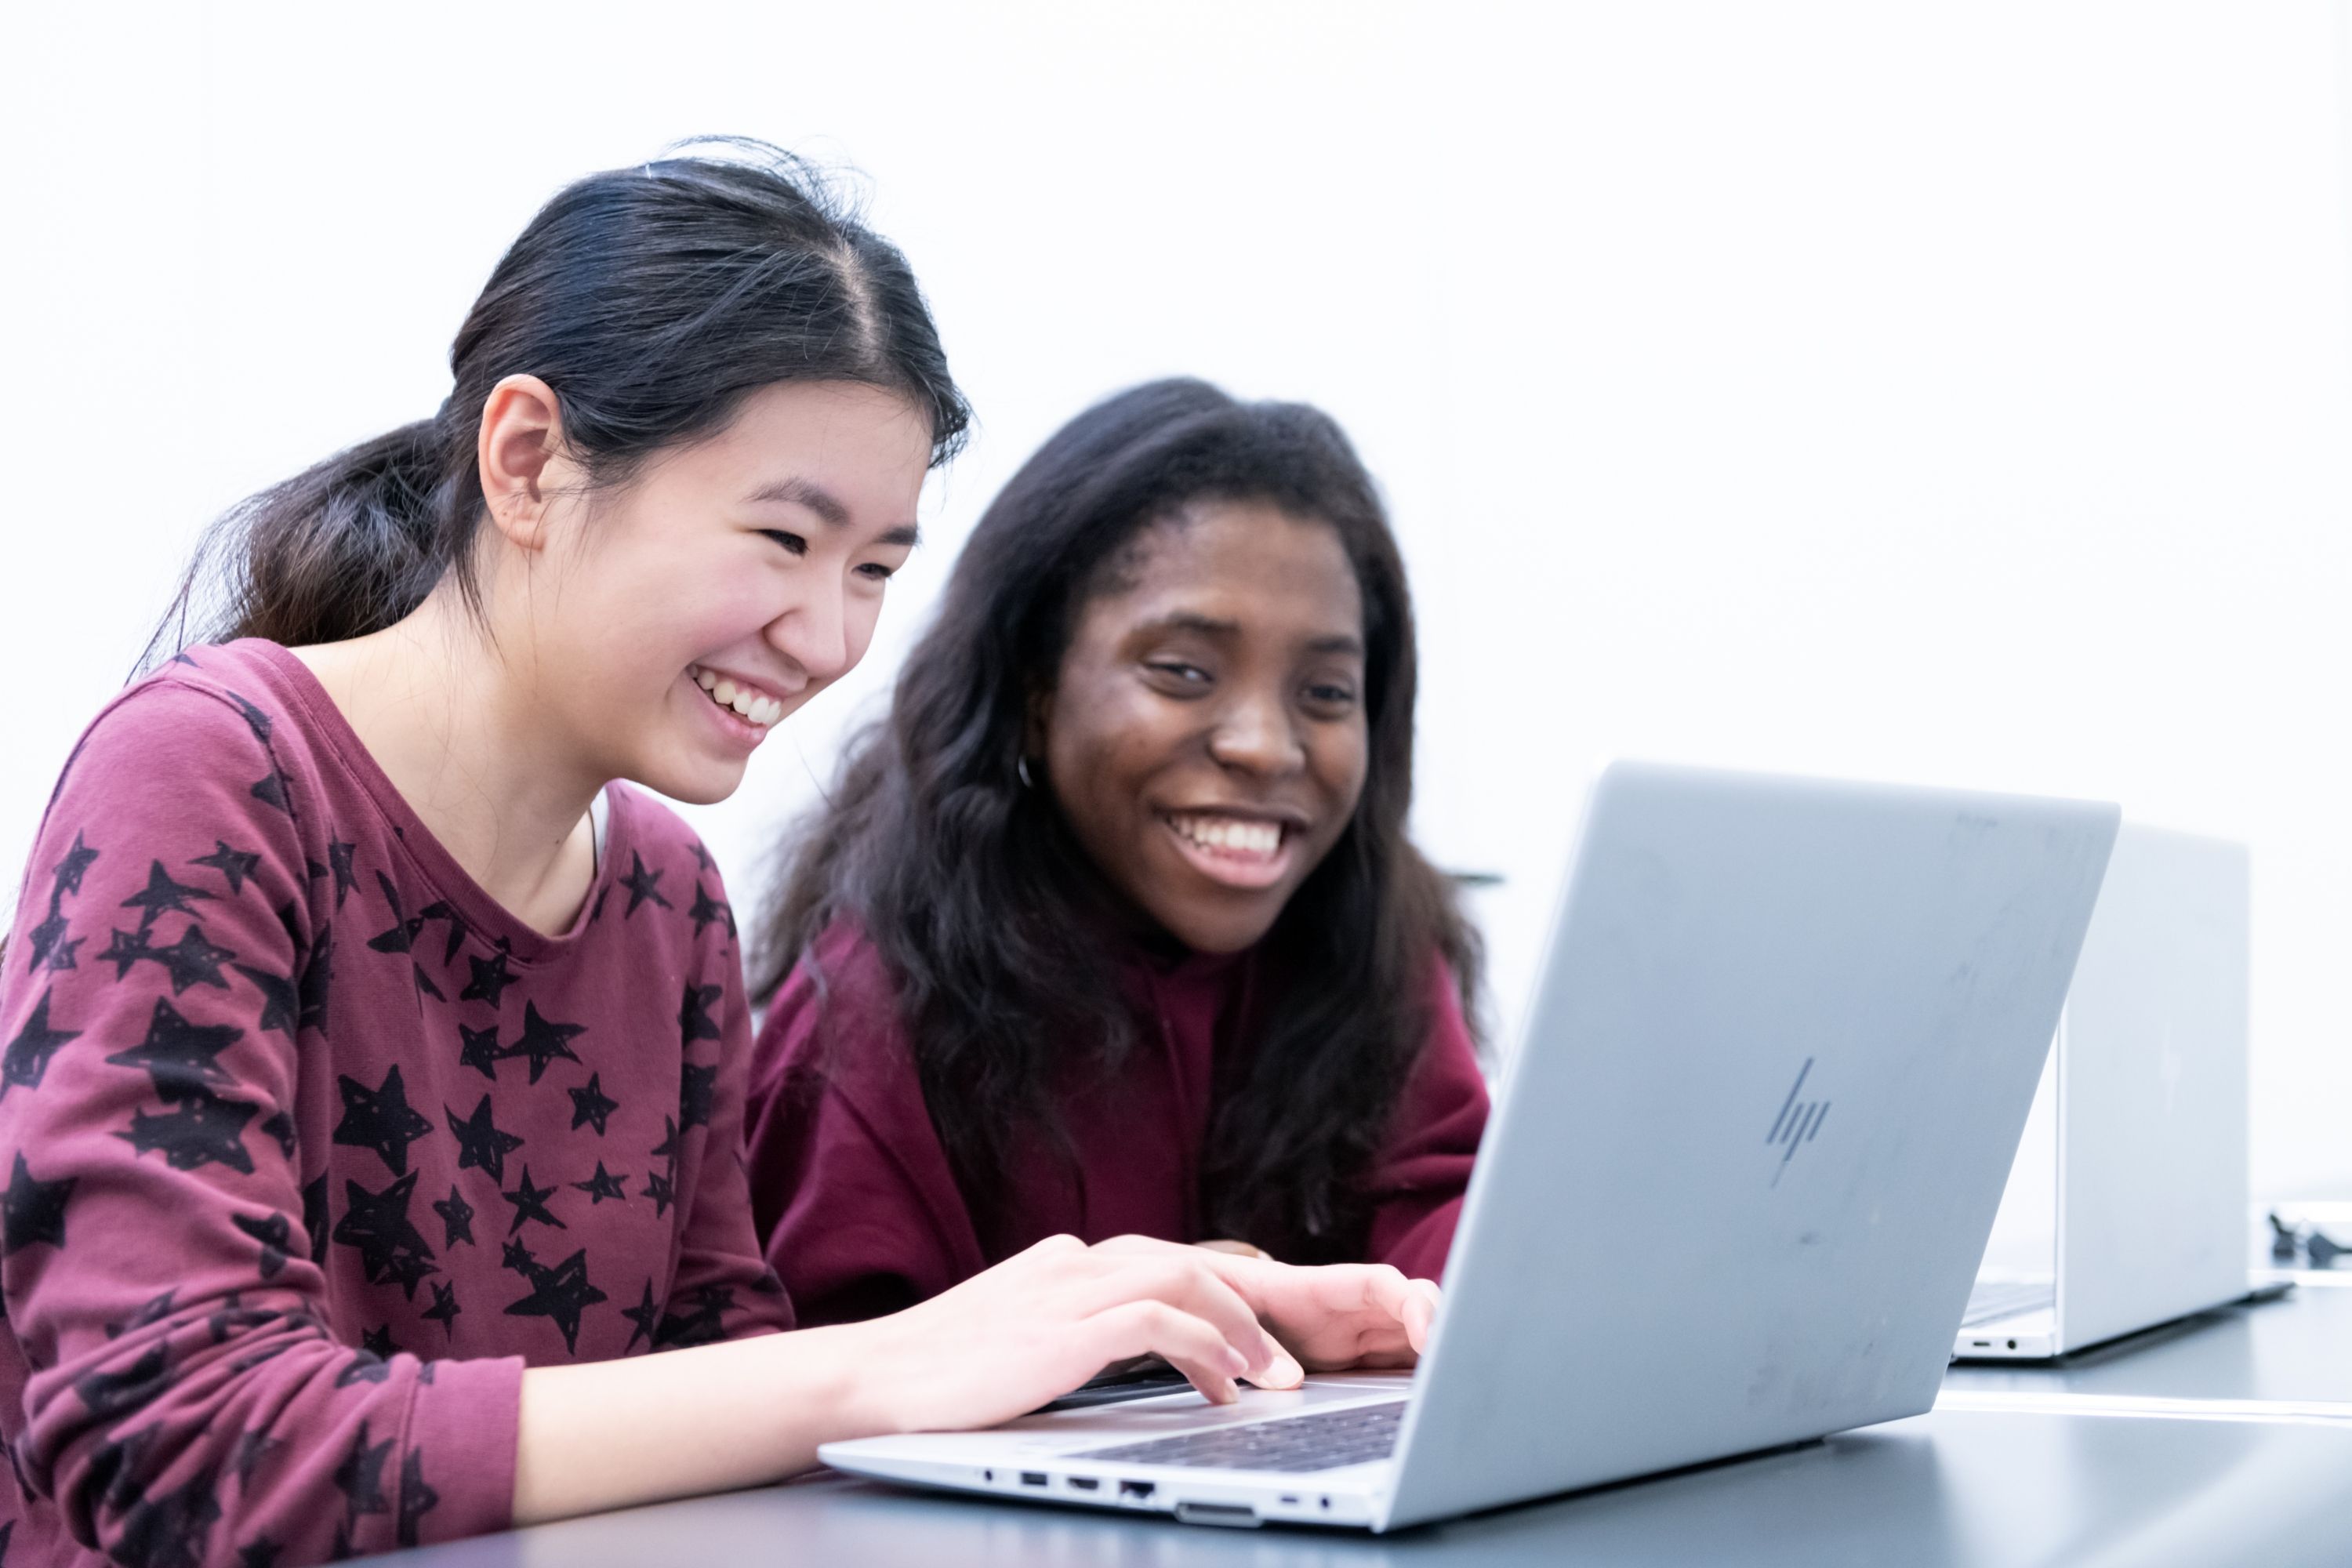 Two students smiling at a laptop